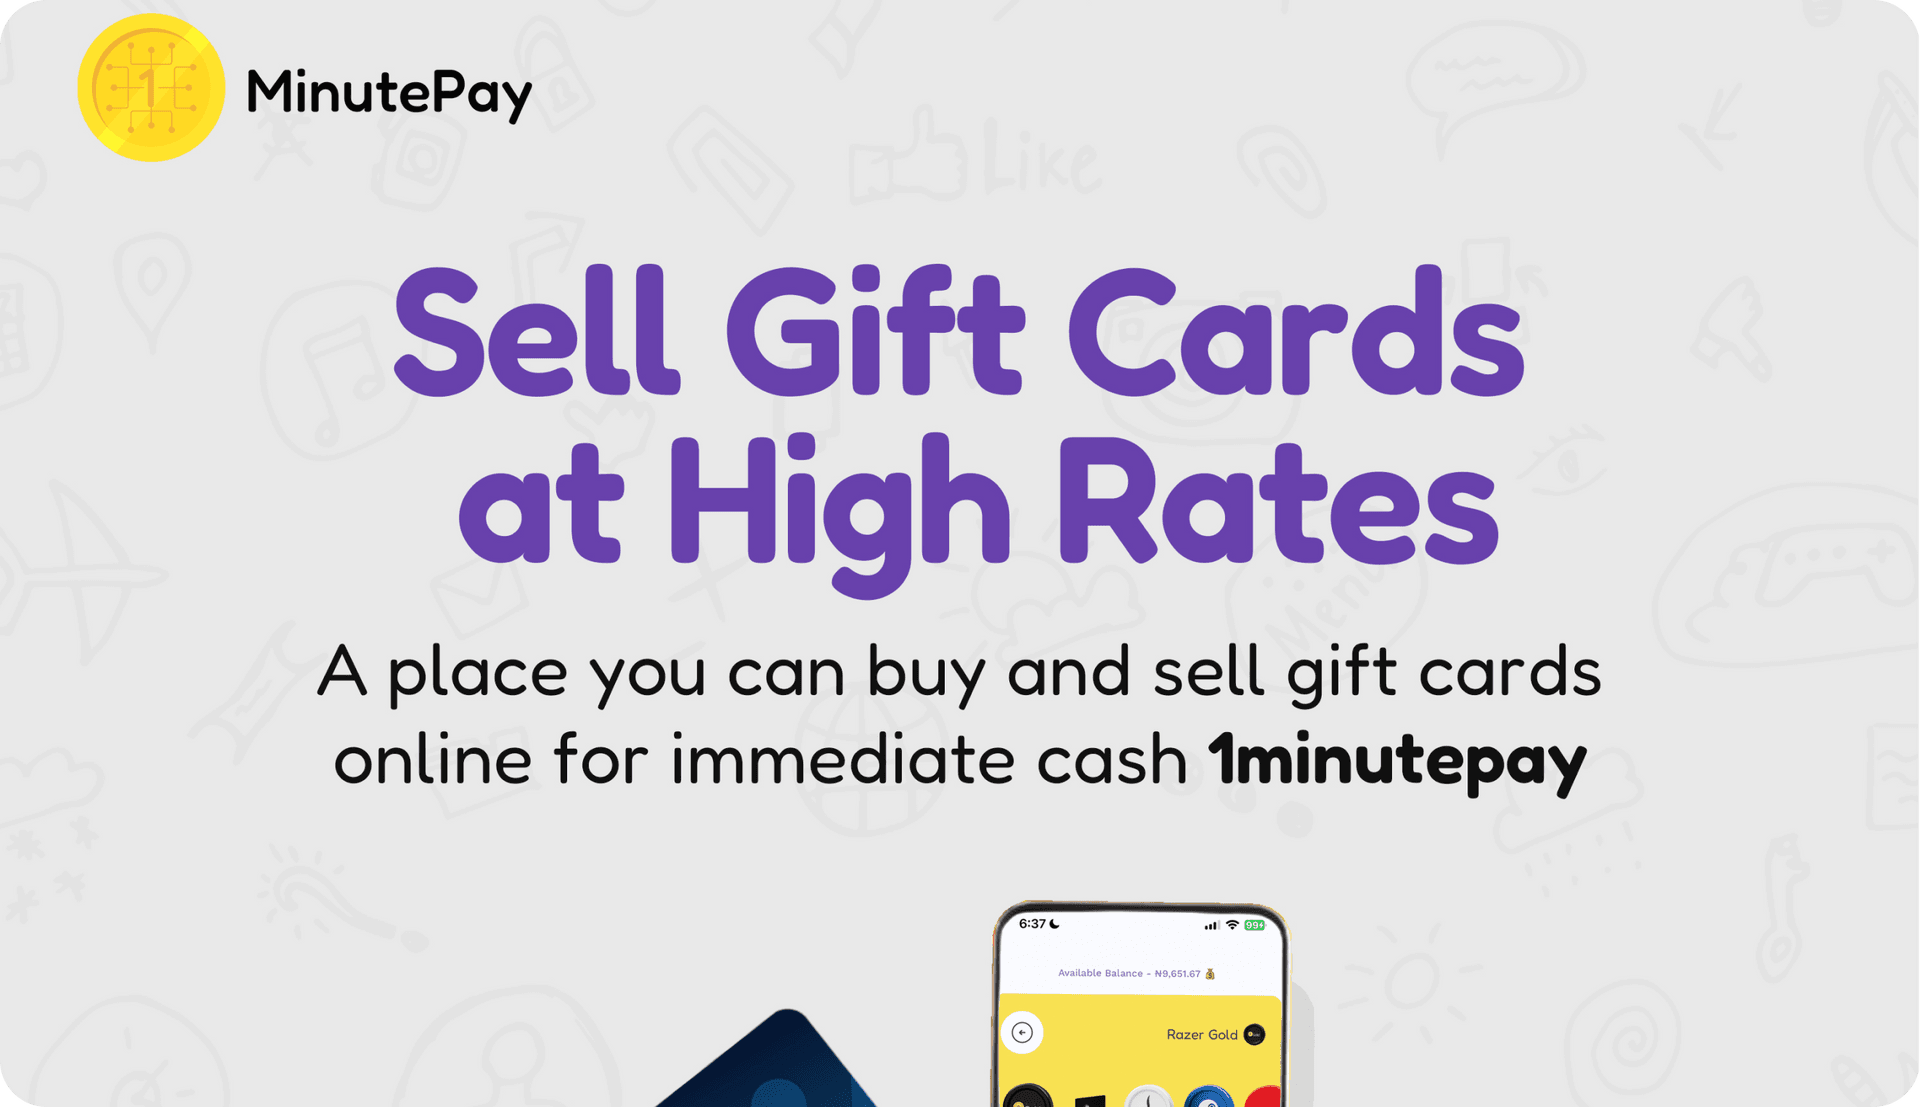 Sell Gift Cards at High Rates